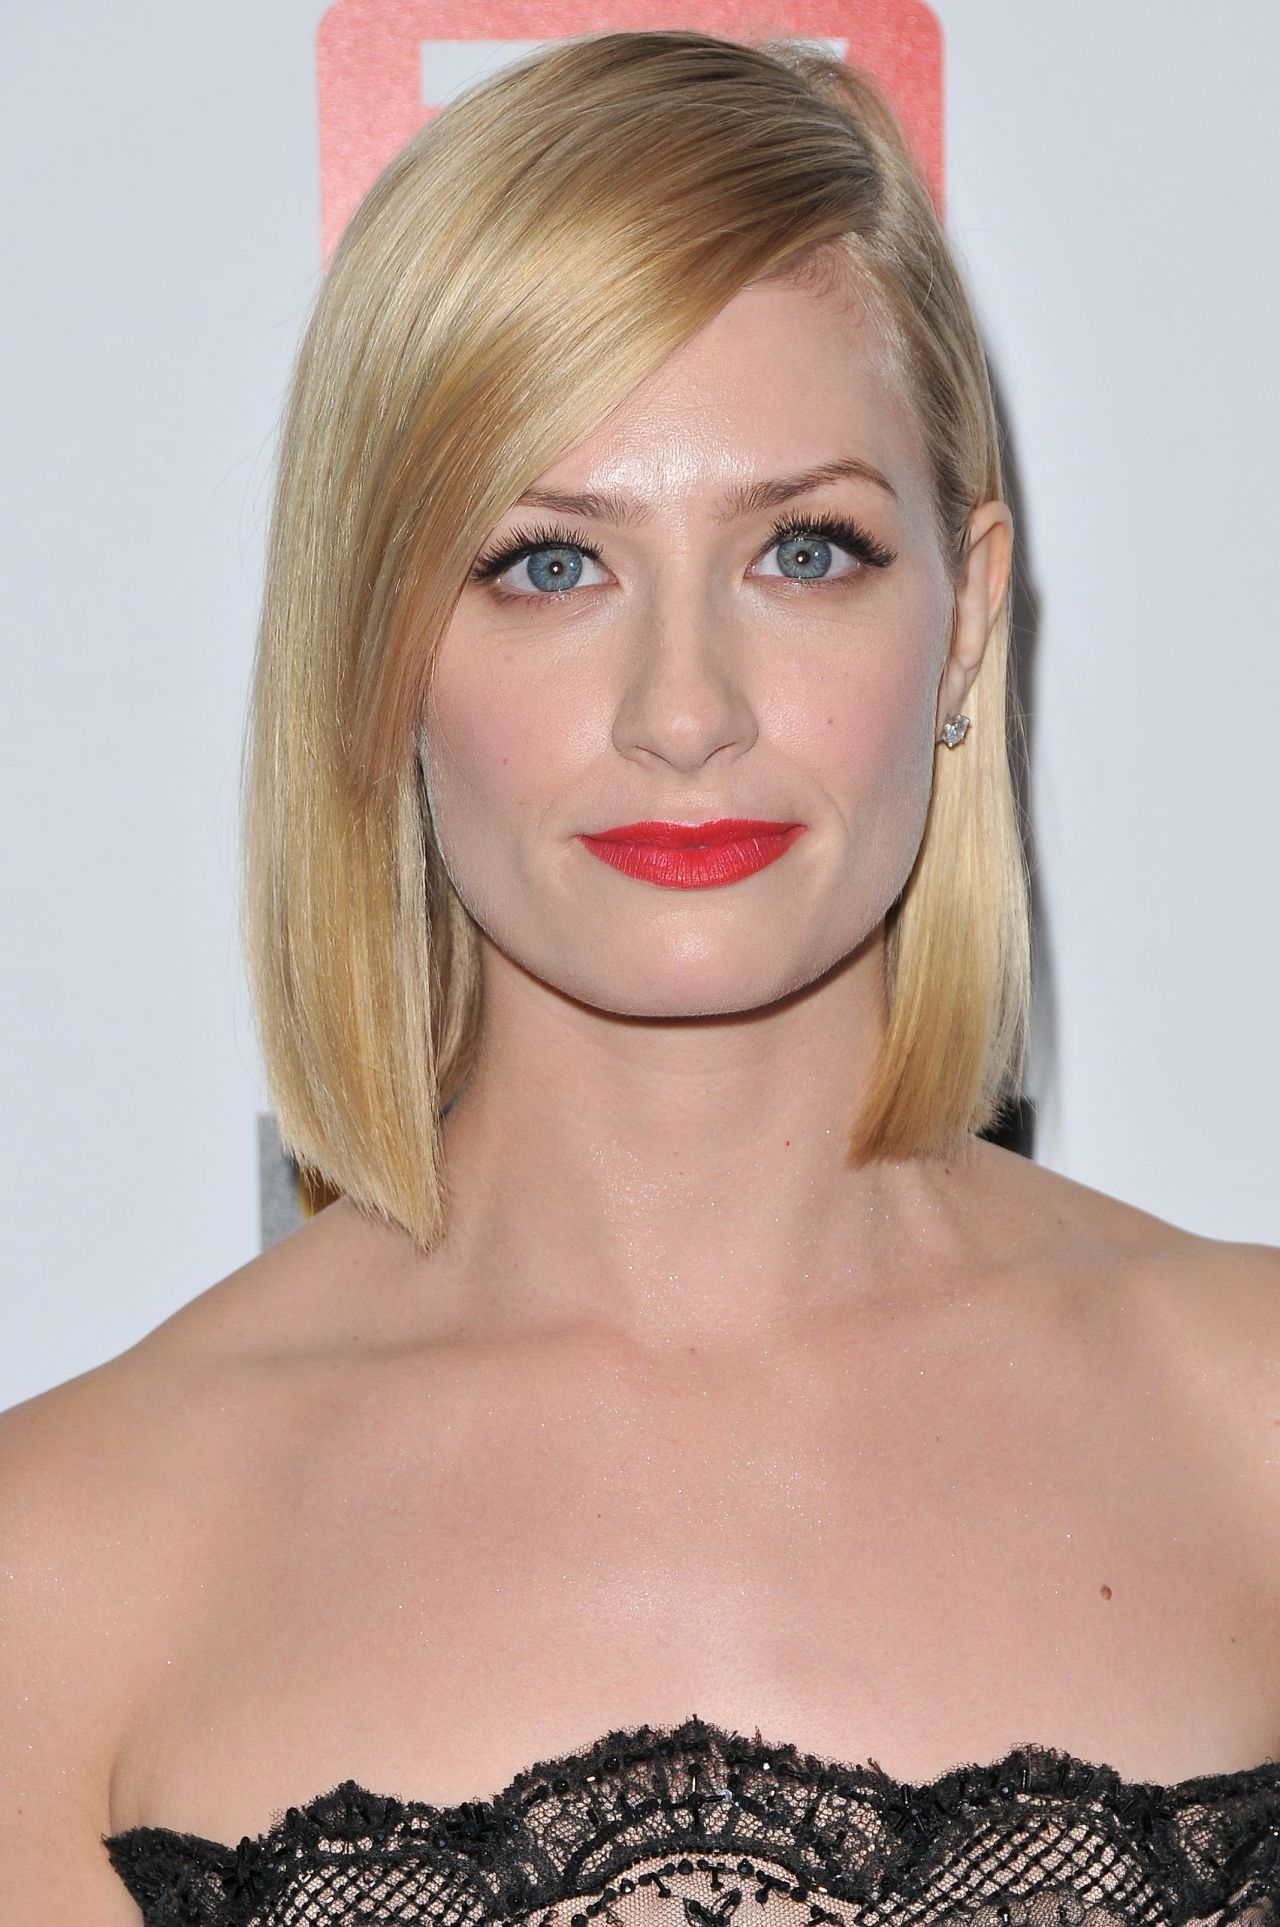 beth-behrs-height-weight-and-age-charmcelebrity